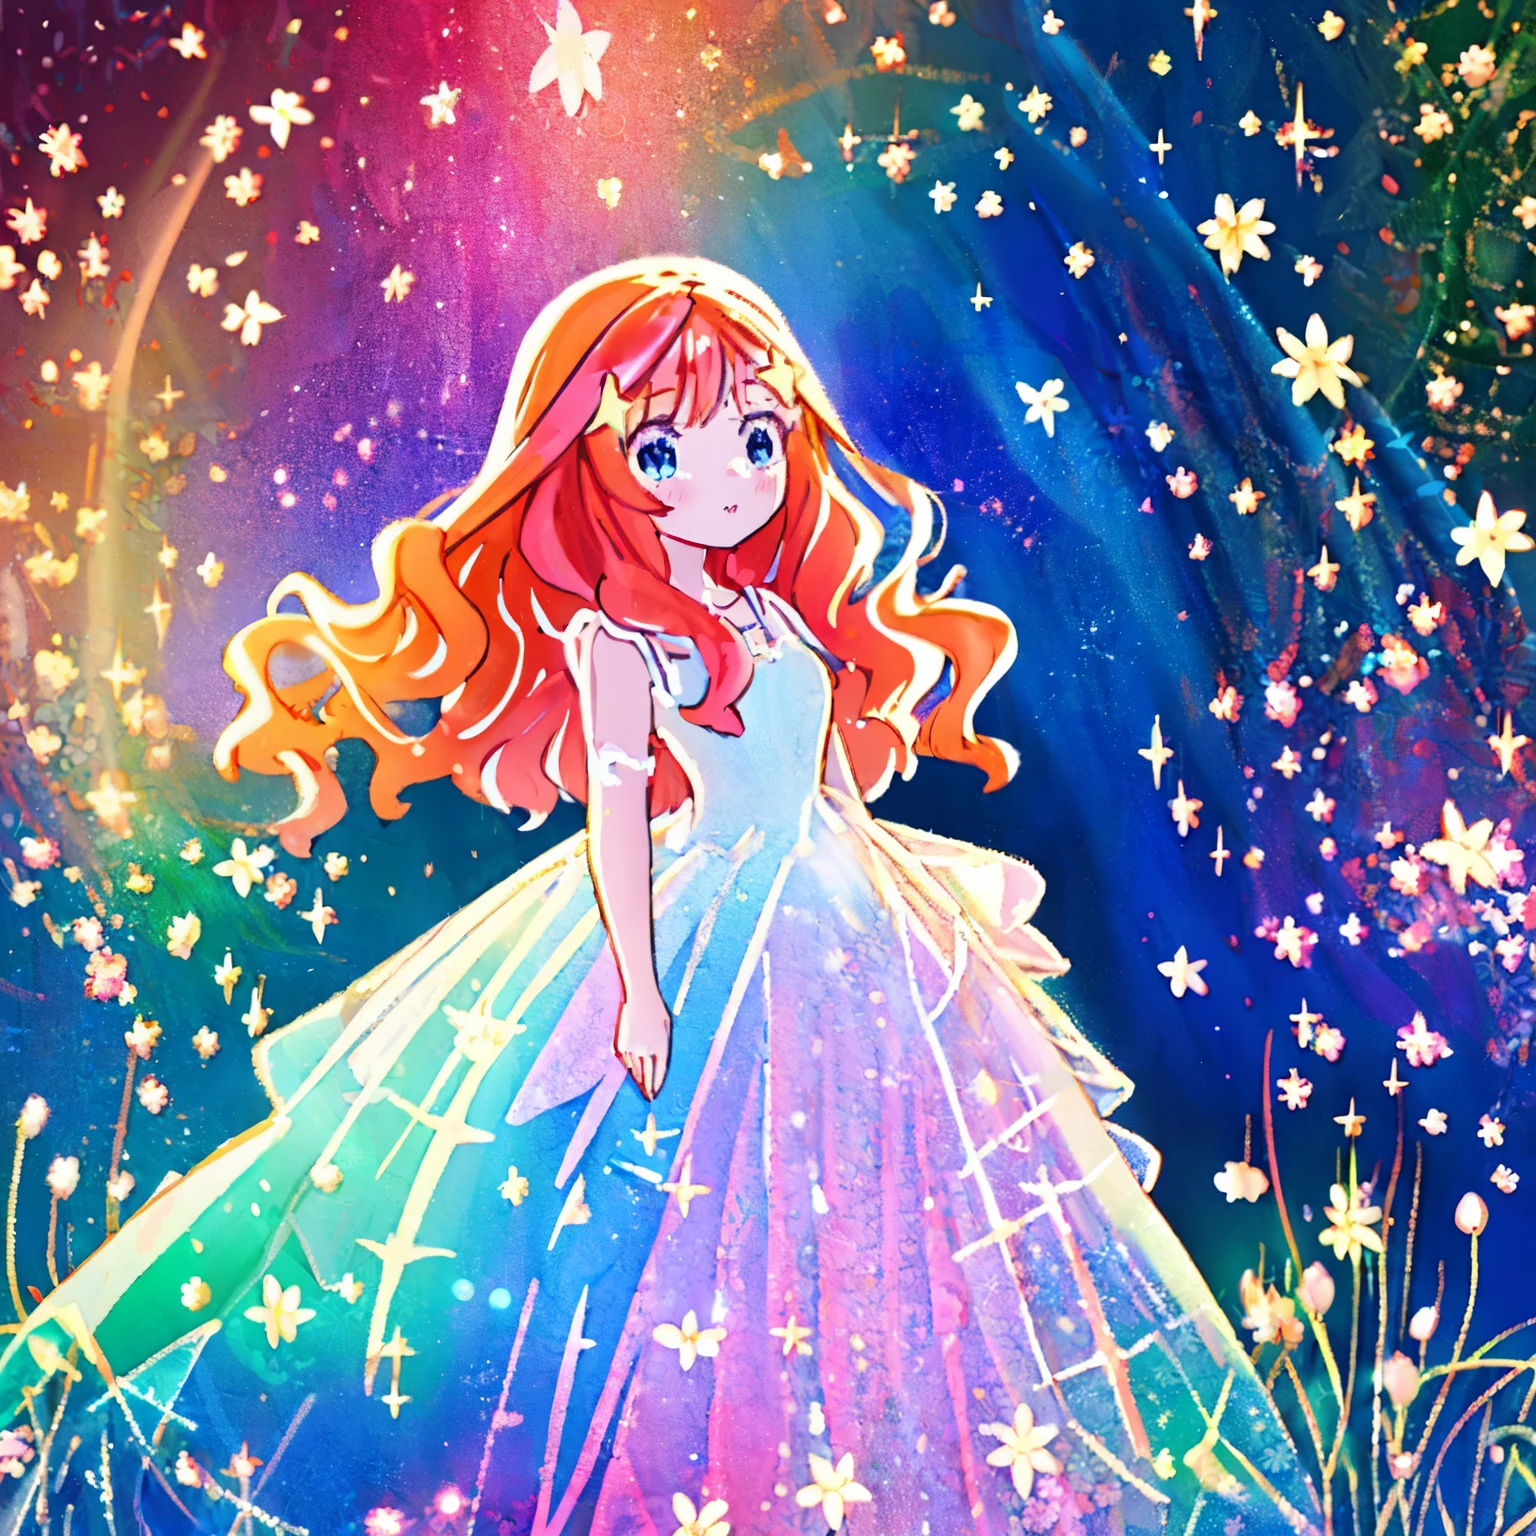 beautiful girl in flowing ballgown dress, (glowing fairy wings), glowing flowing ballgown, long wavy hair, sparkling fairy wings, watercolor illustration, flowers and colorful plants, inspired by Glen Keane, inspired by Lois van Baarle, disney art style, by Lois van Baarle, glowing aura around her, by Glen Keane, Itsuki Nakano, long fluffy red hair, blue eyes, nakano_itsuki,  jen bartel, glowing lights! digital painting, flowing glowing hair, glowing flowing hair, star hairclips, 5-pointed star hairclips, beautiful digital illustration, fantasia otherworldly landscape plants flowers, beautiful, masterpiece, best quality, anime disney style